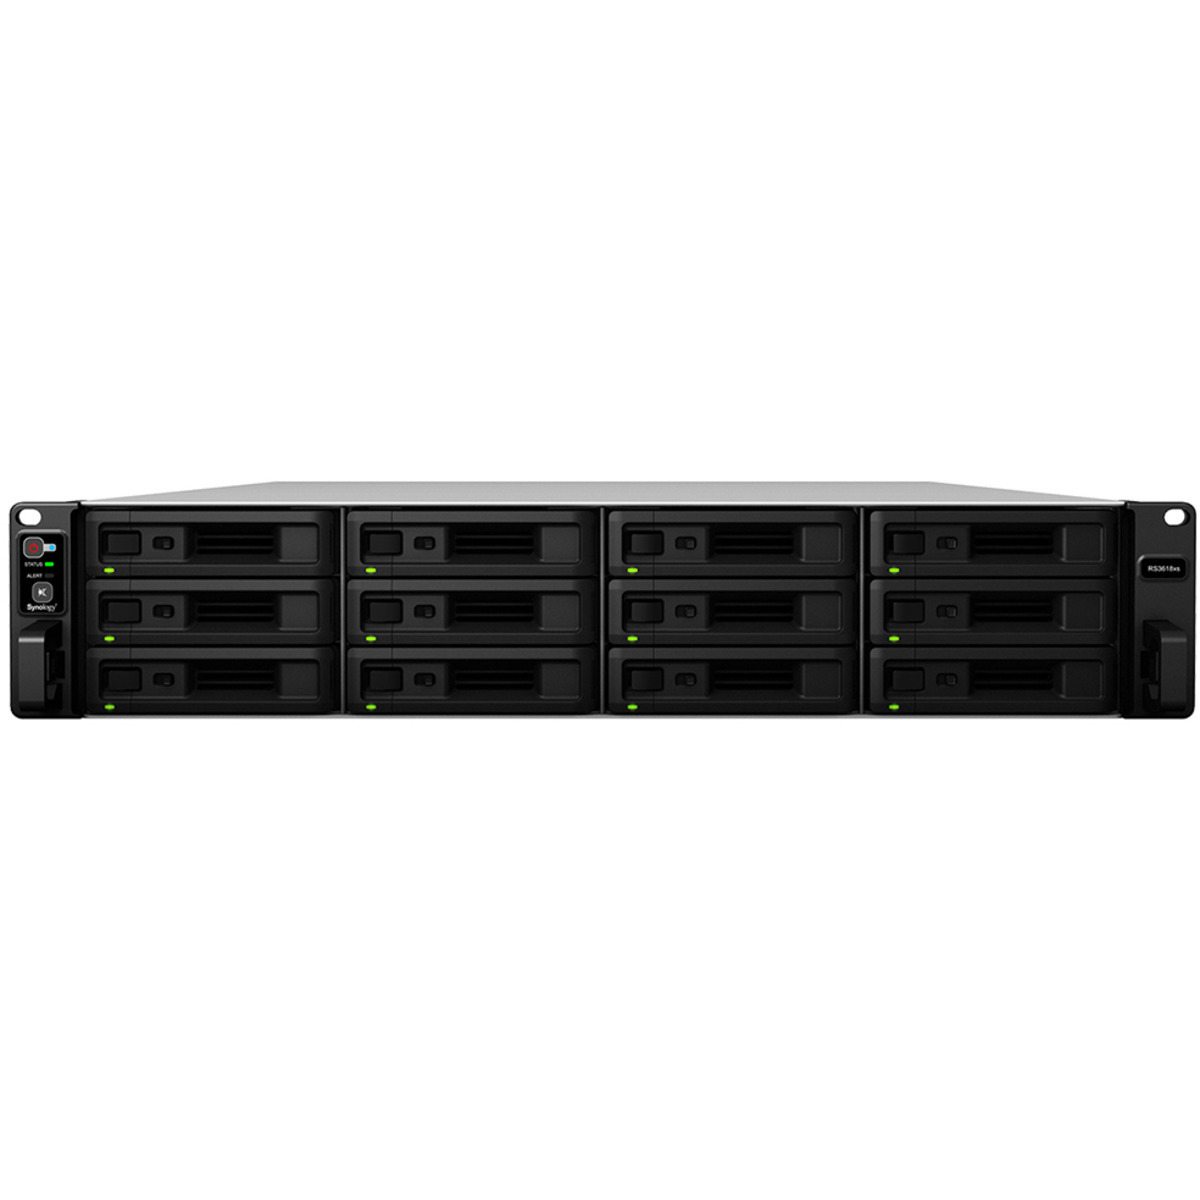 Synology RackStation RS3618xs 84tb 12-Bay RackMount Large Business / Enterprise NAS - Network Attached Storage Device 7x12tb Synology HAT5300 Series HAT5300-12T 3.5 7200rpm SATA 6Gb/s HDD ENTERPRISE Class Drives Installed - Burn-In Tested RackStation RS3618xs